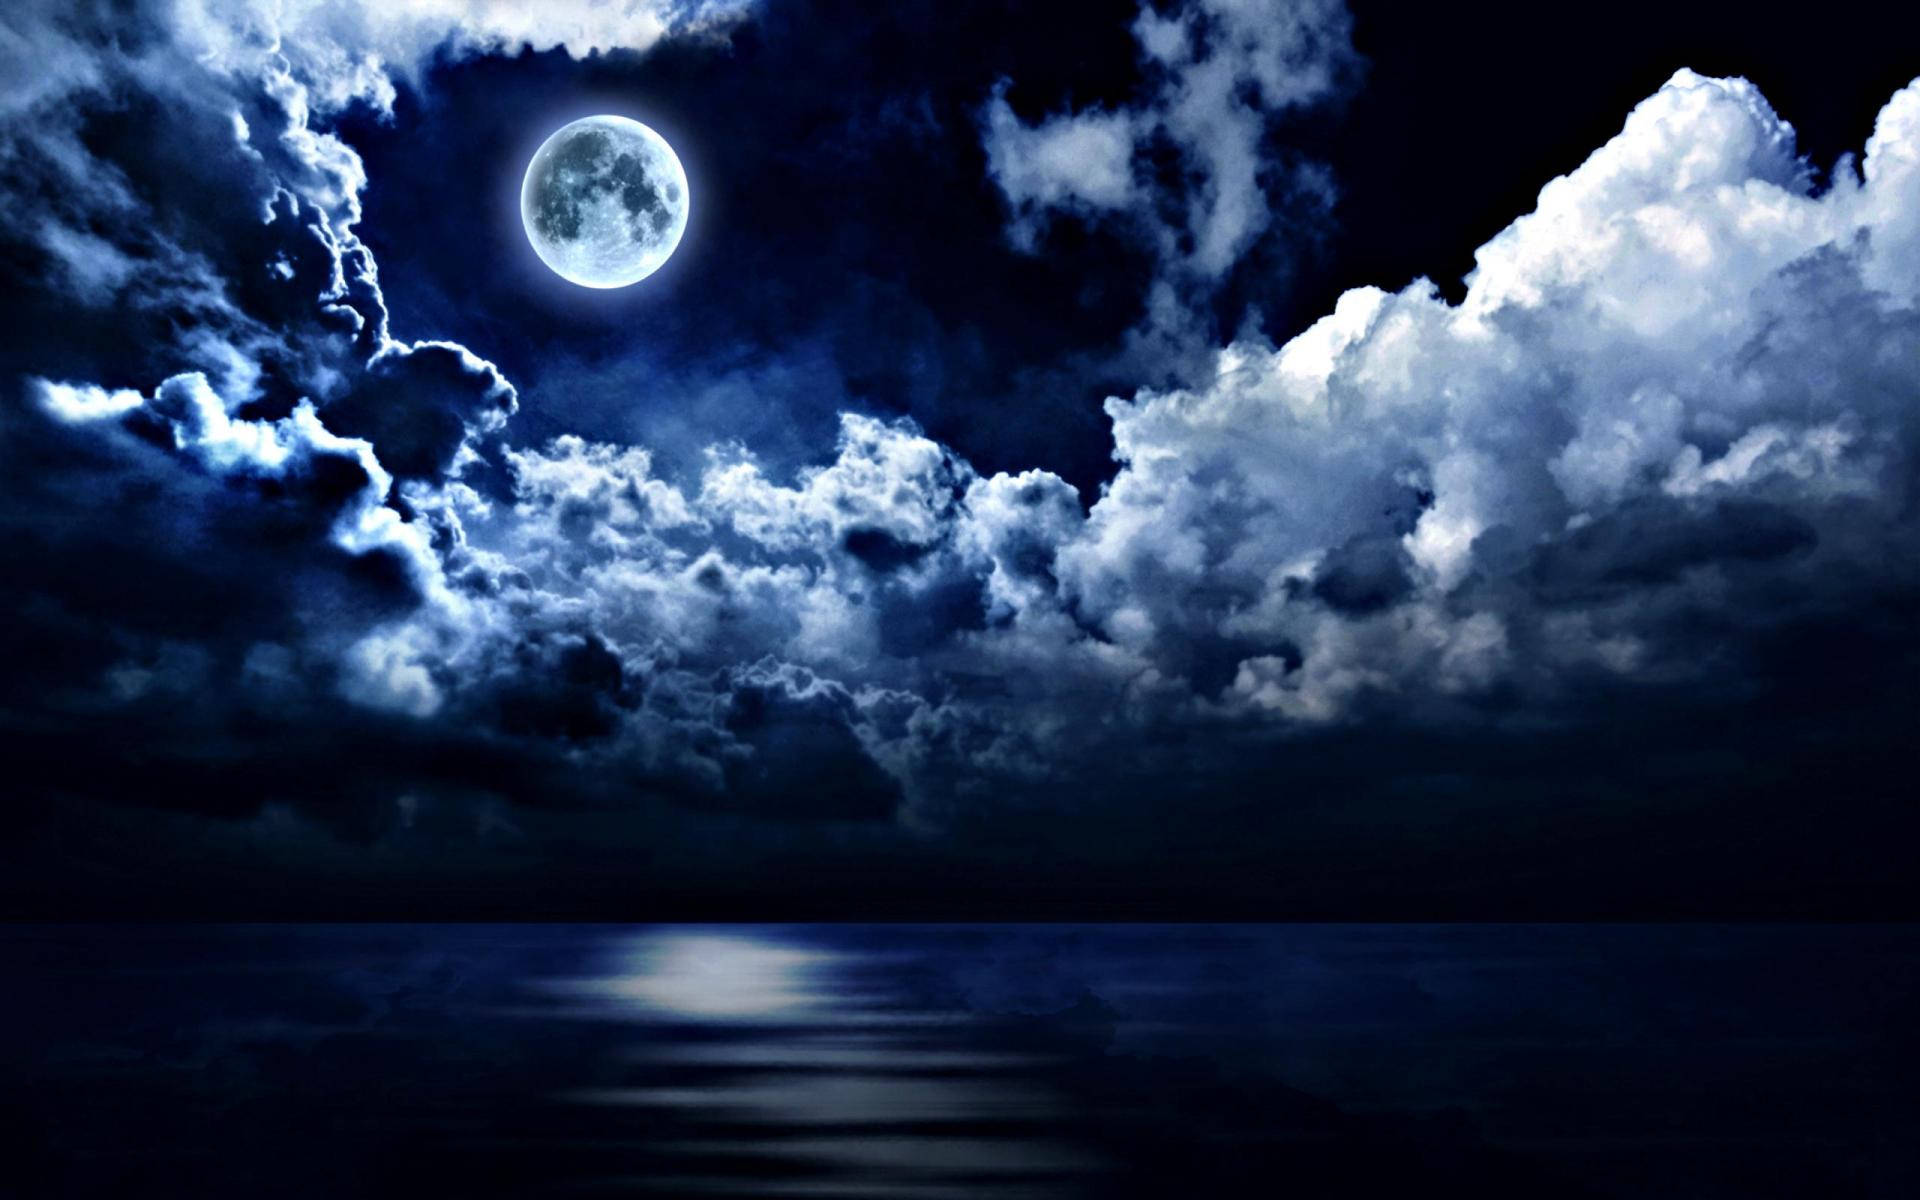 A Magical Blue Hue Is Illuminating The Full Moon Reflecting Off A Calm Night Sea. Wallpaper